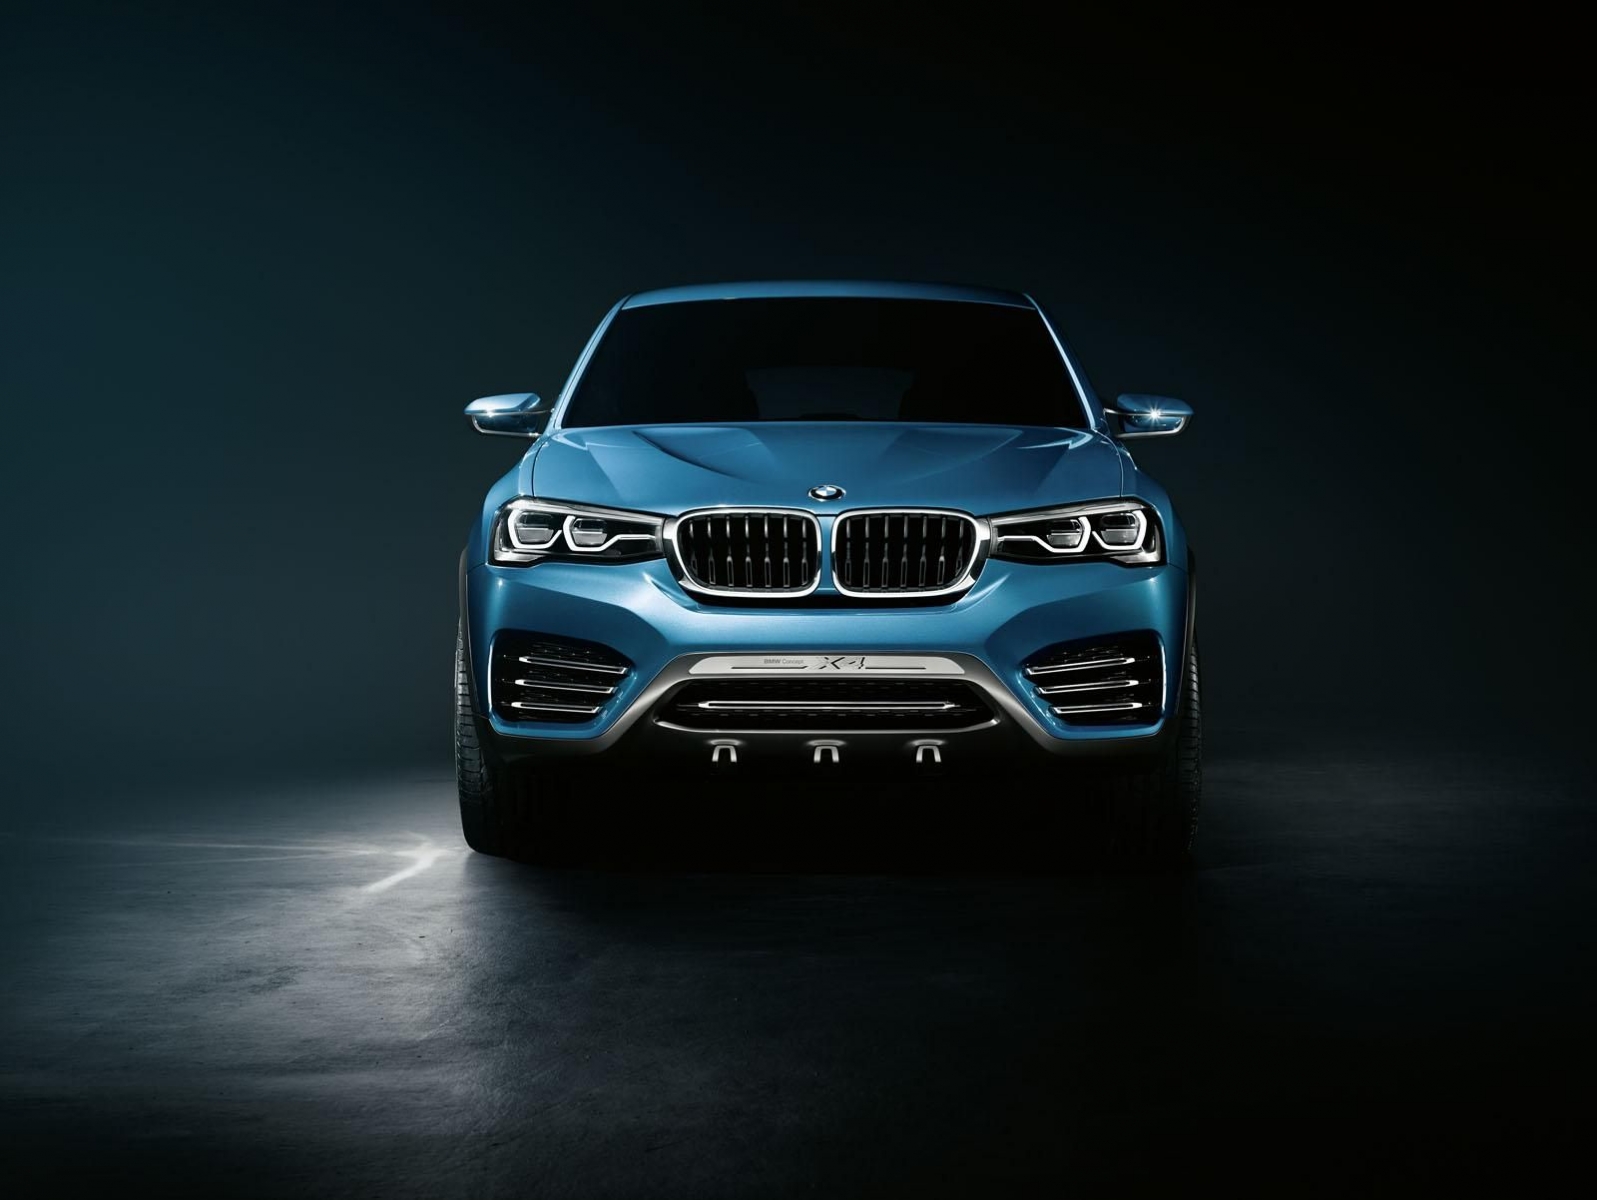 Bmw X4 HD Wallpaper Background Image Photos Pictures Yl